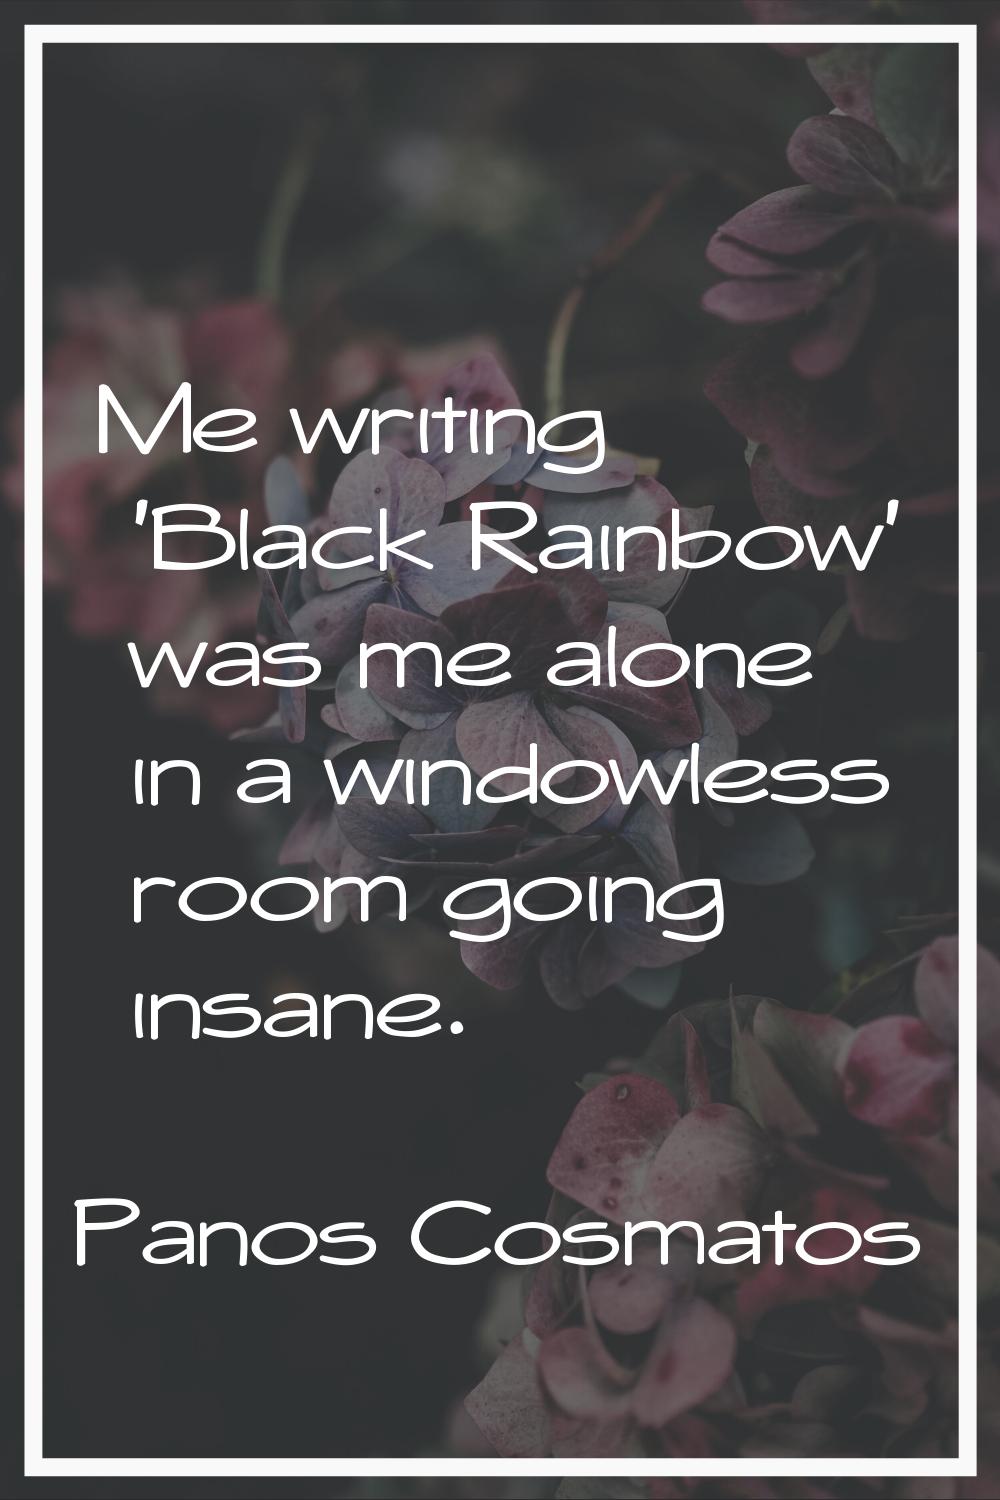 Me writing 'Black Rainbow' was me alone in a windowless room going insane.